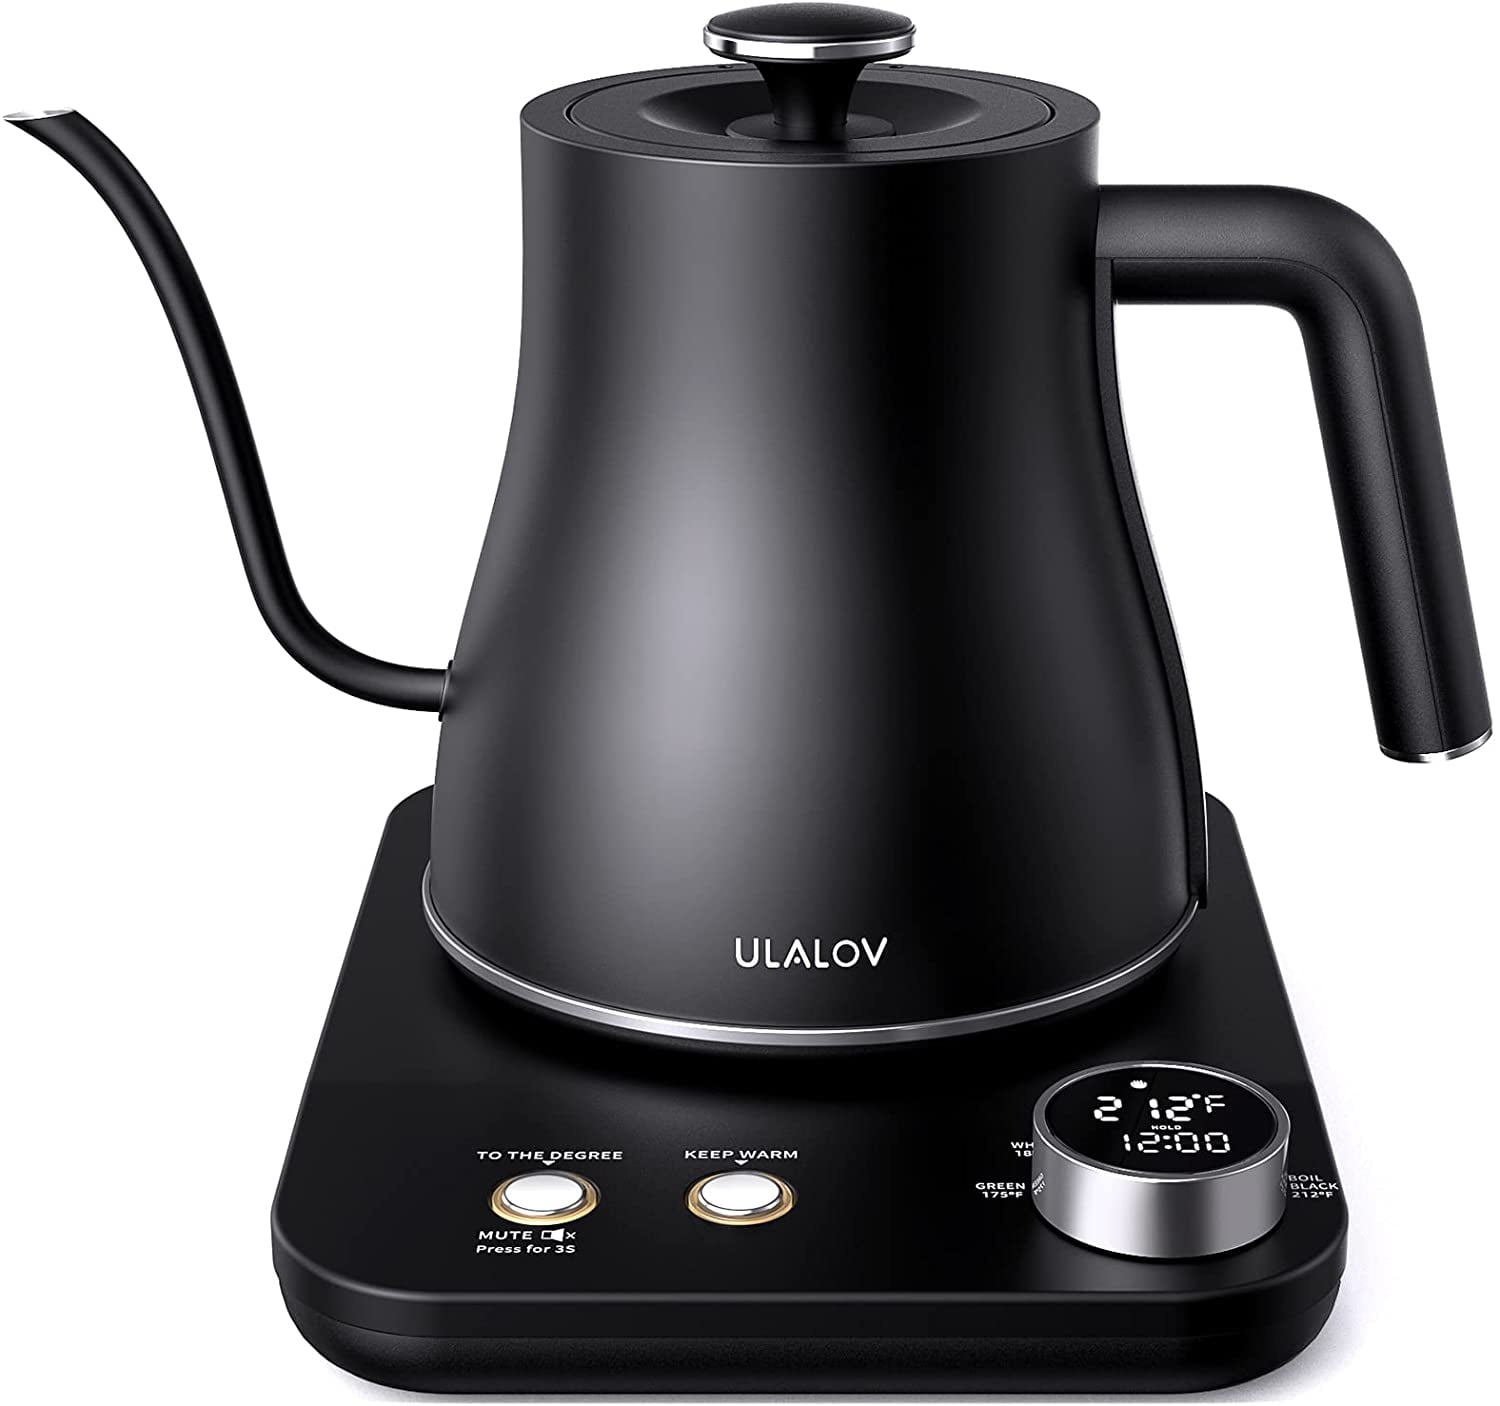 12H Keep Warm,1200W-0.8L Leak-Proof Ultra Fast Boiling Electric Kettle for Pour-Over Coffee/Tea Ulalov Gooseneck Kettle Temperature Control 5 Variable Presets 100% Stainless Steel